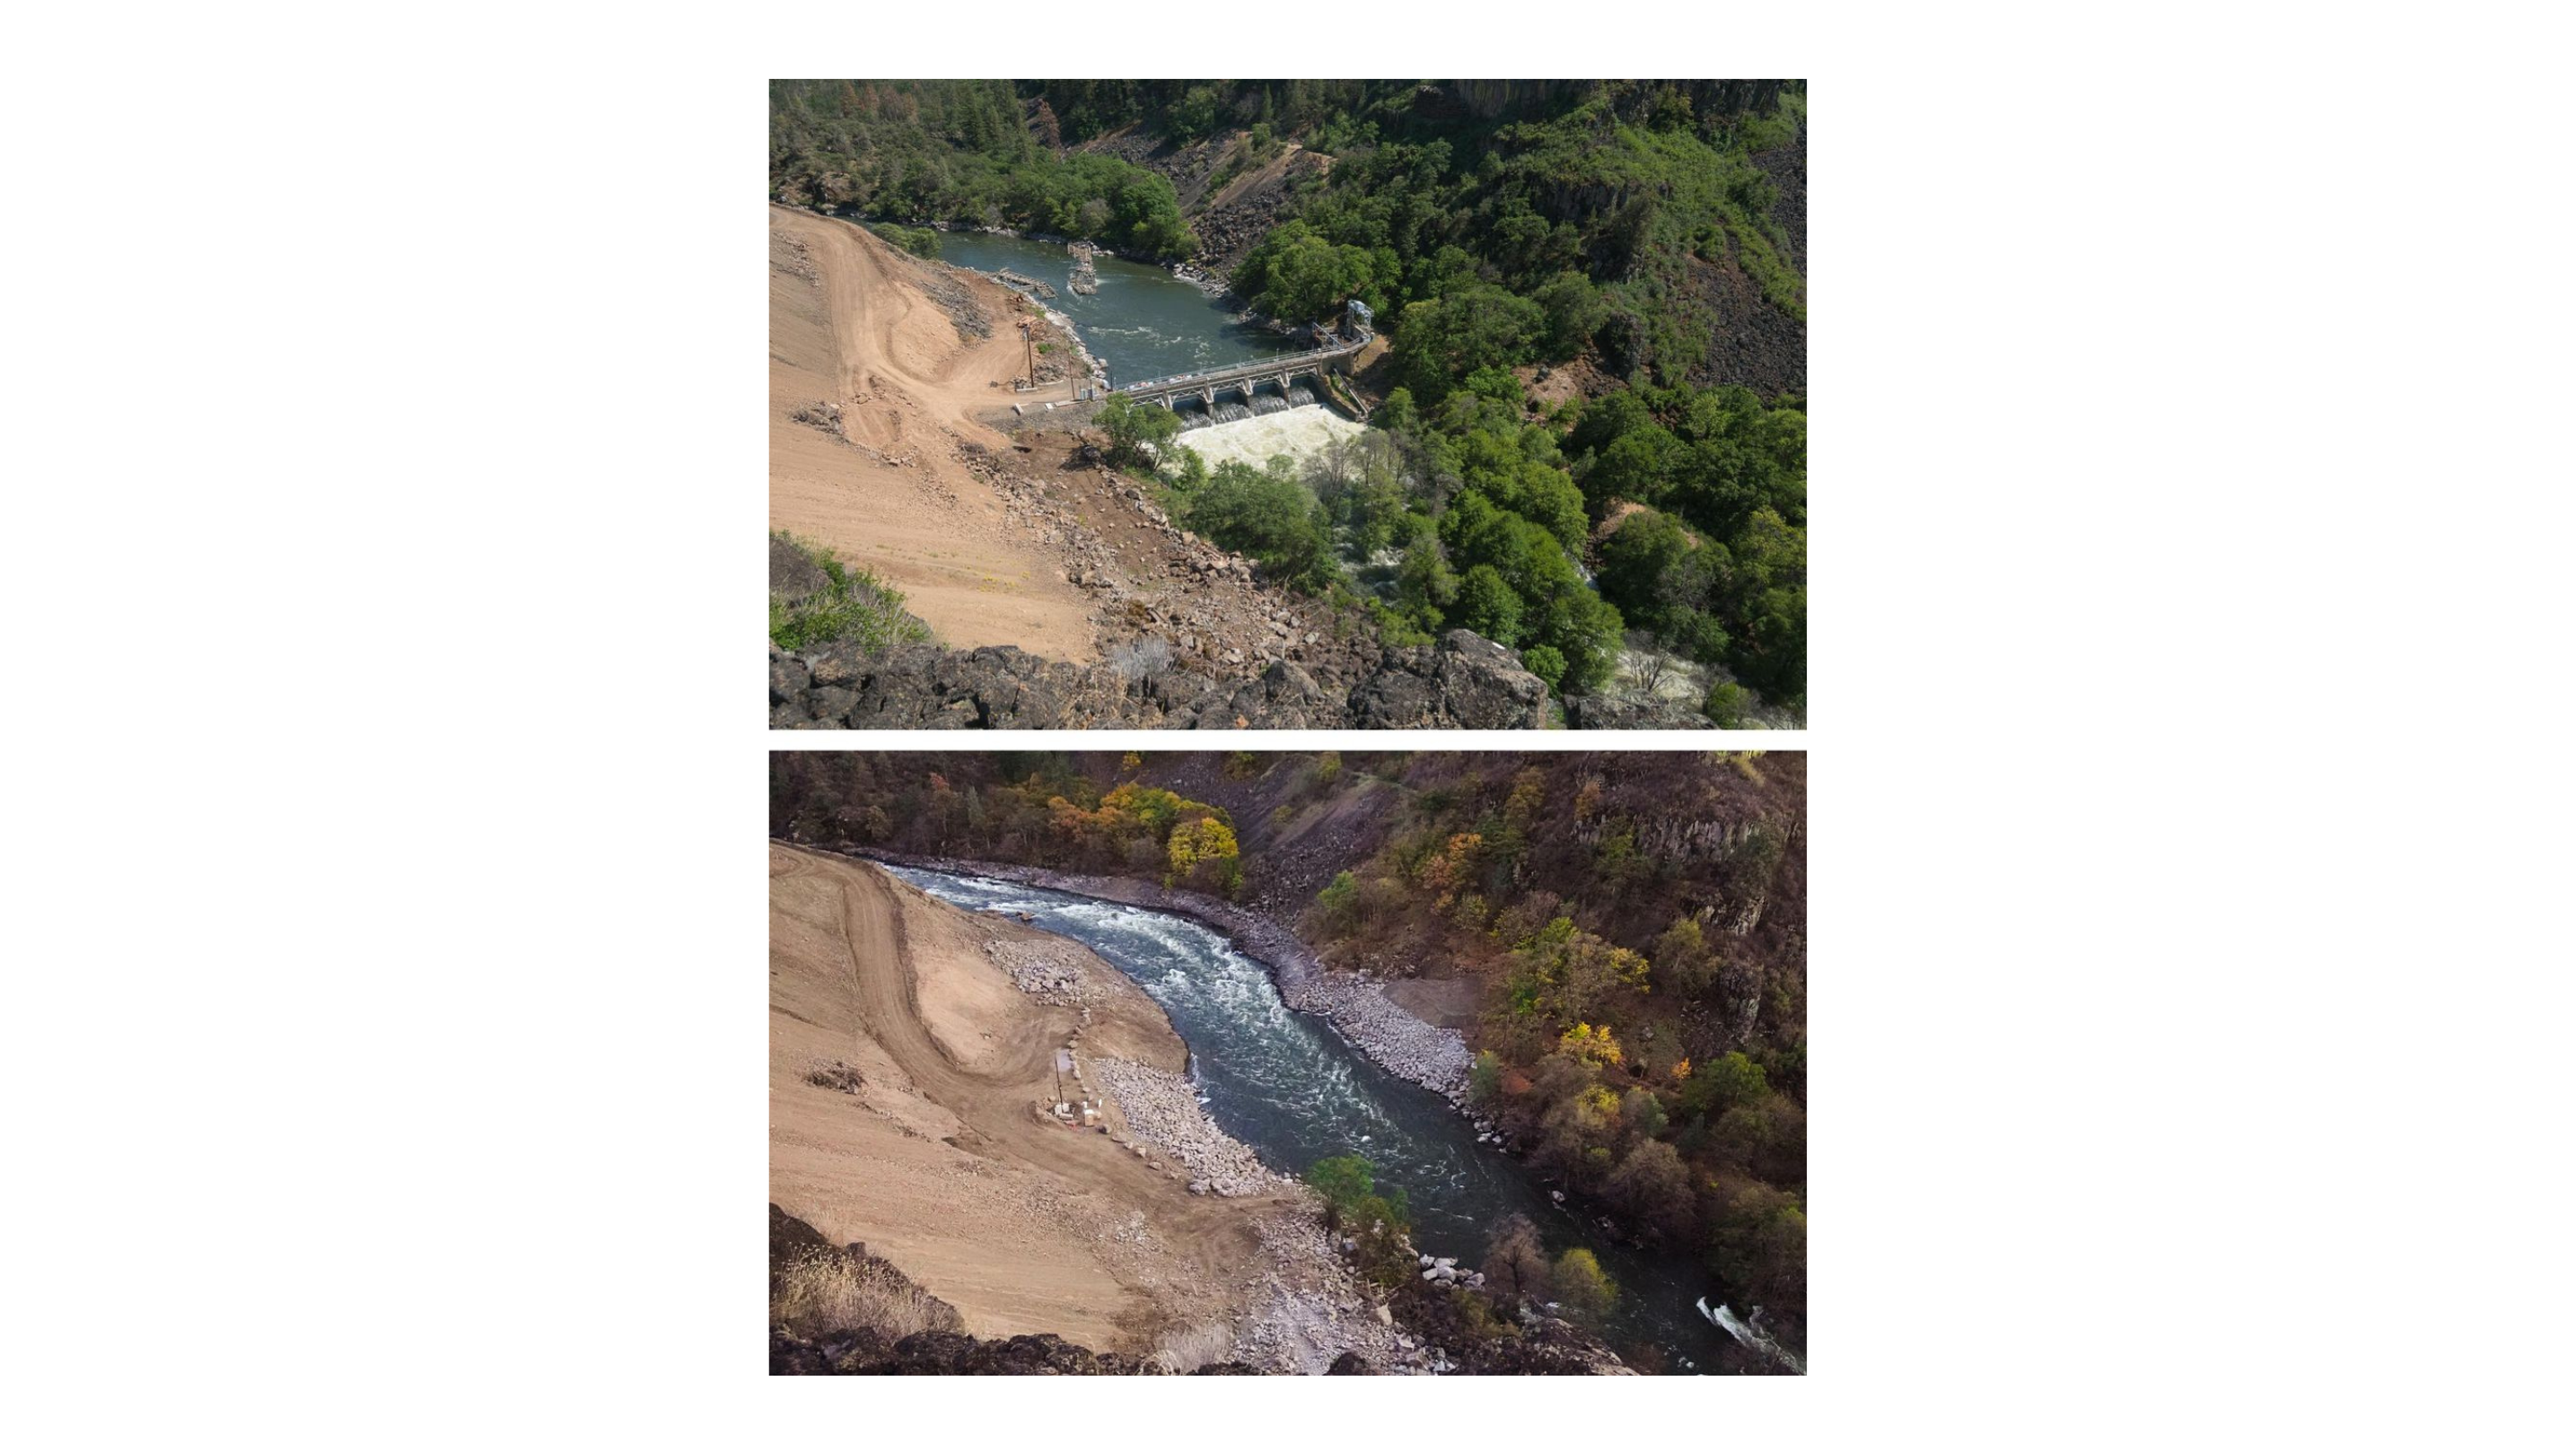 Klamath Copco 2 dam removal before and after